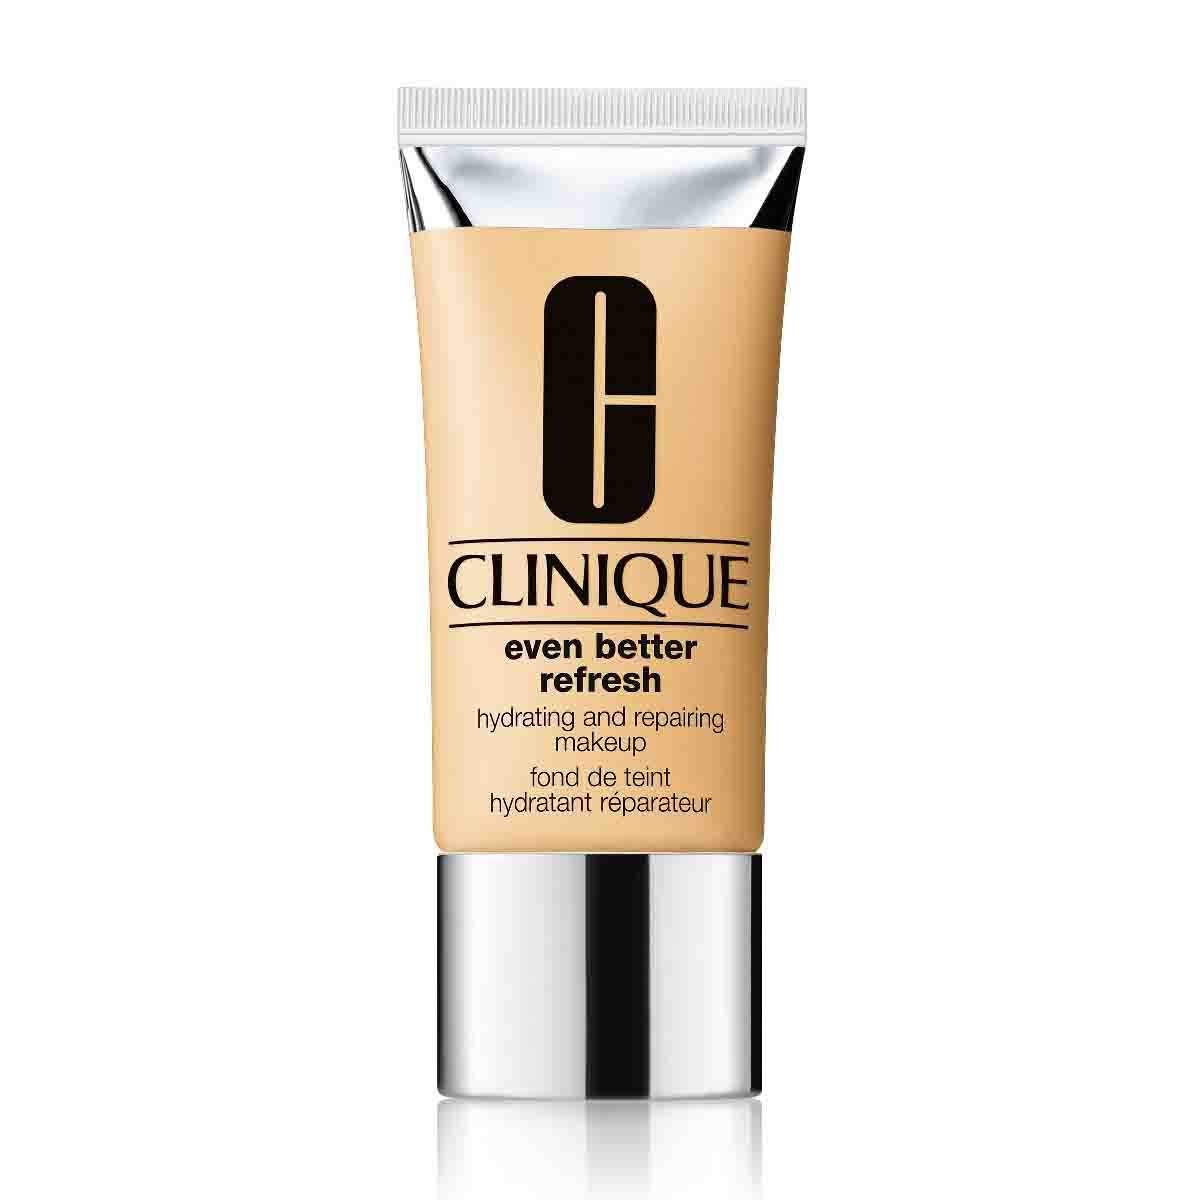 Even Better Refresh Hydrating And Repairing Makeup  Clinique Tono  Wn 48 Oat  30 Ml